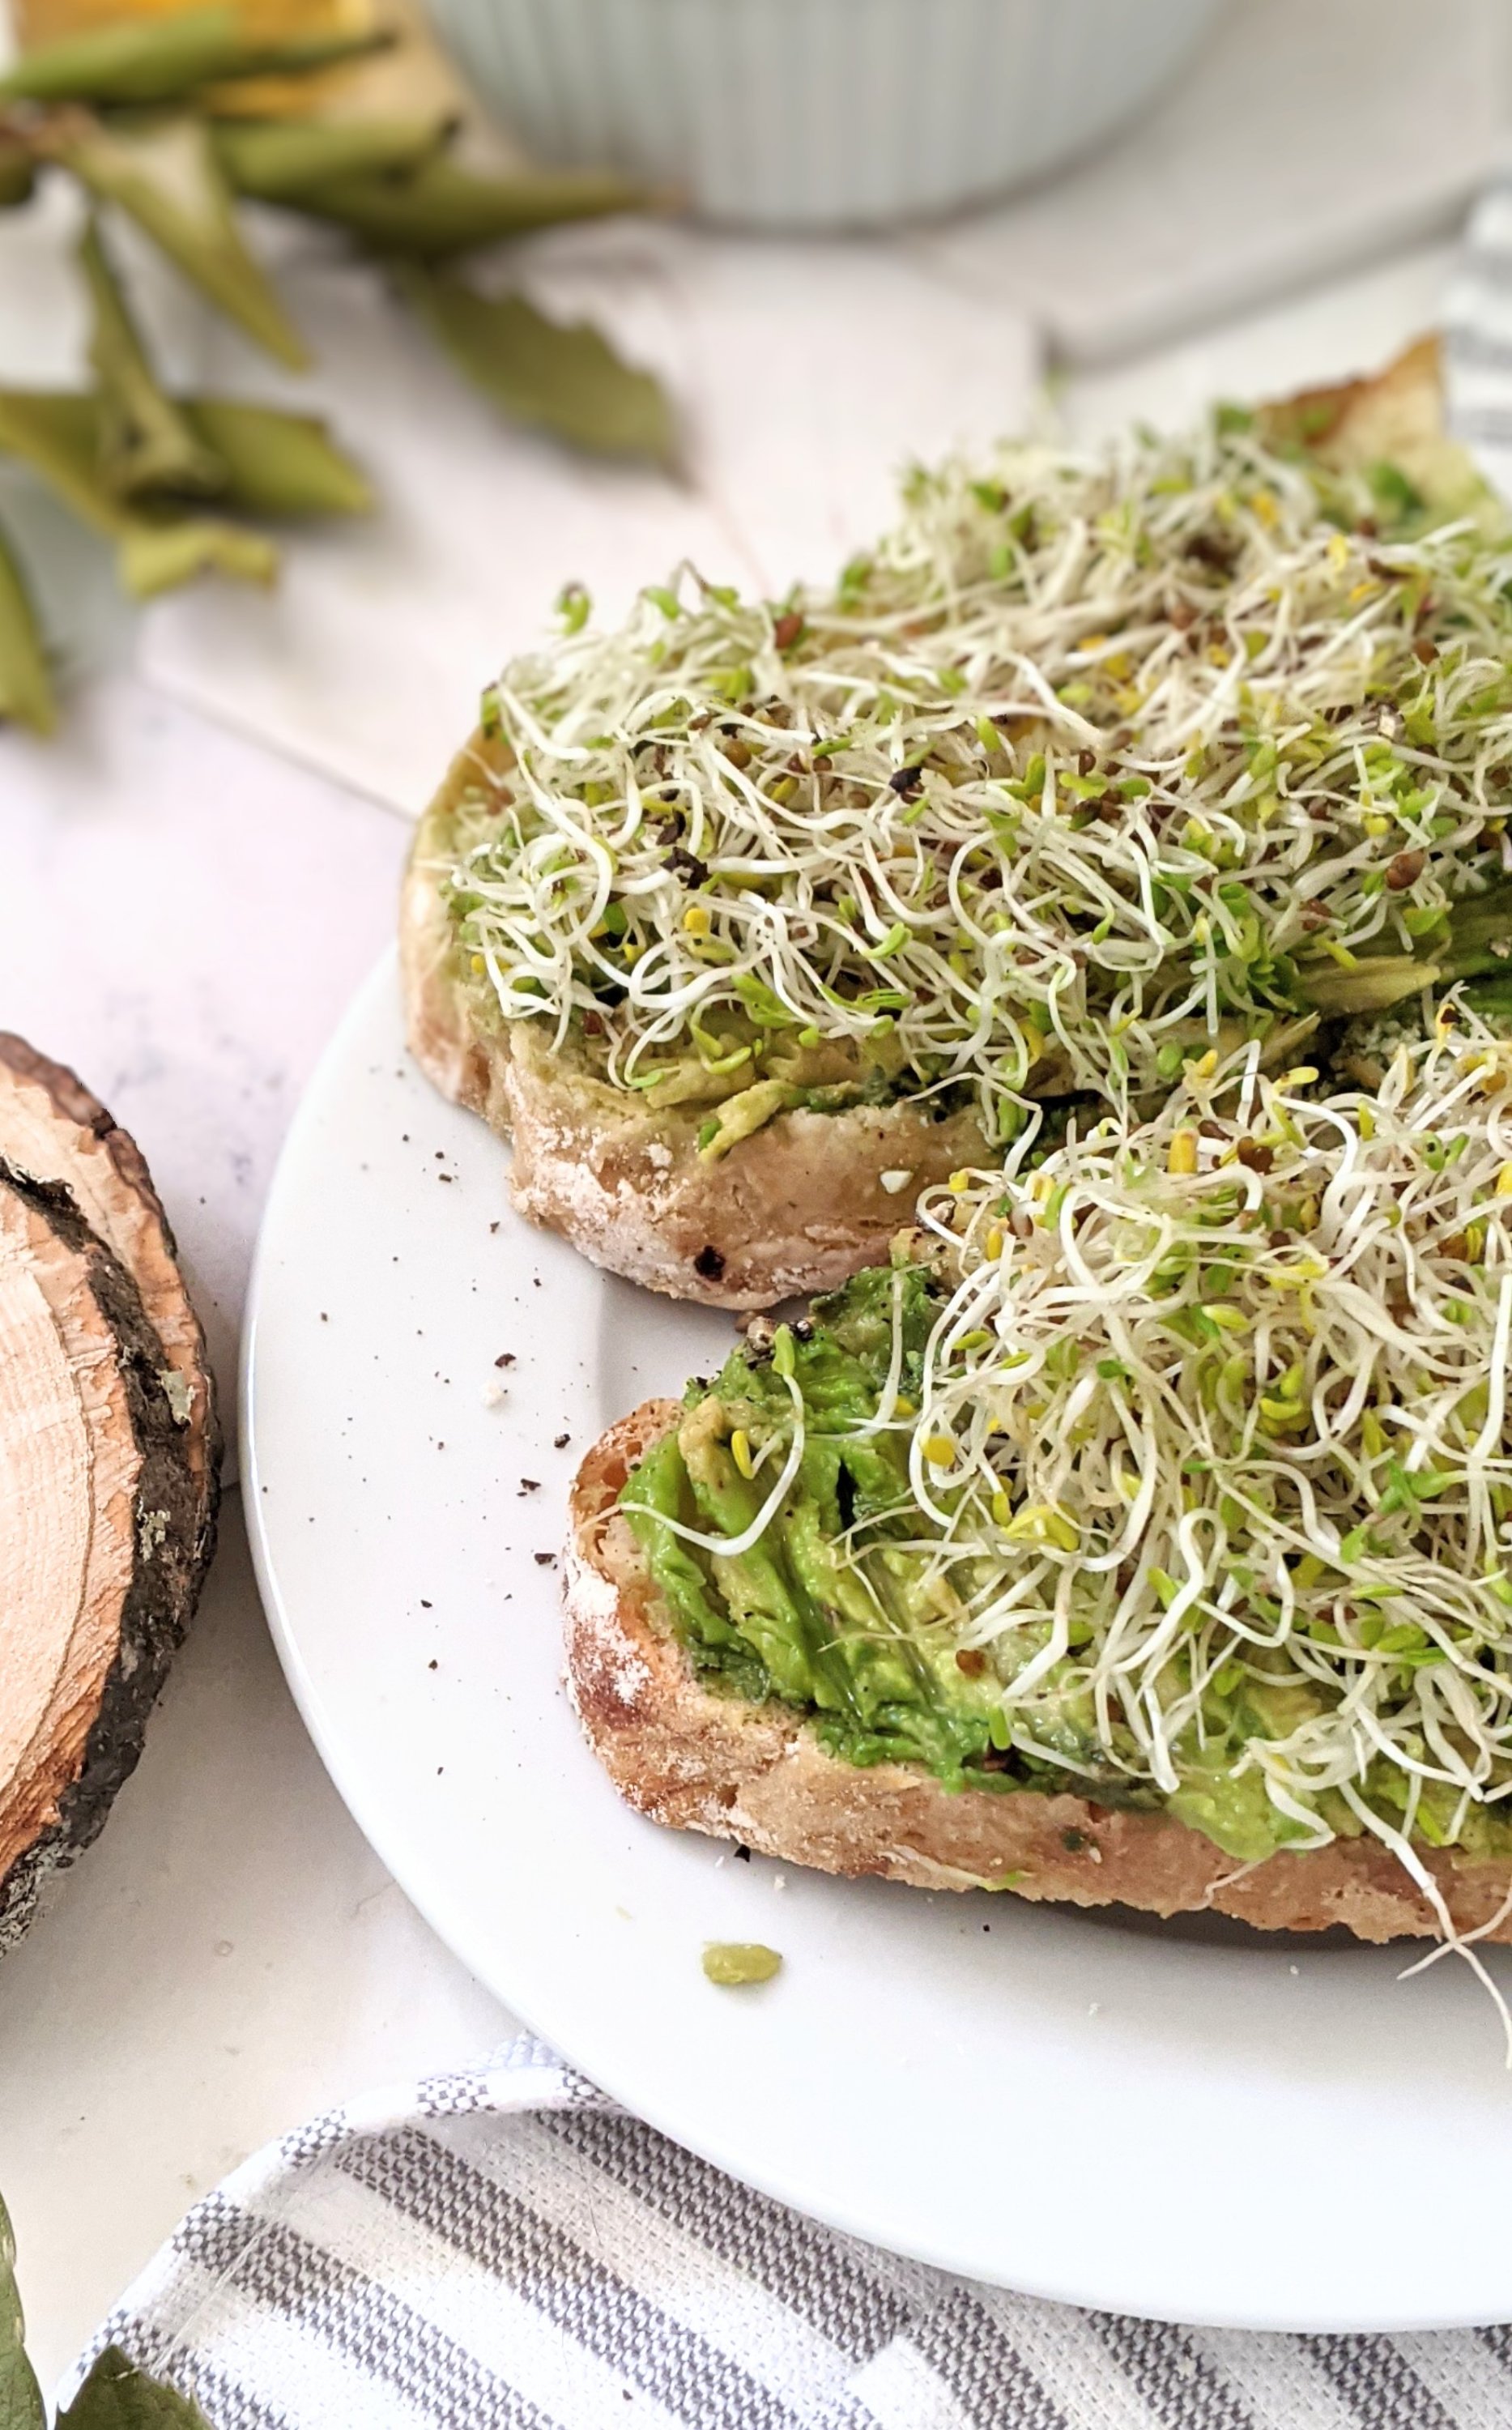 avocado sprouts toast recipe vegan gluten free avocado sprout toast recipes with sprouts for breakfast or brunch healthy avocado toast with montreal steak spice